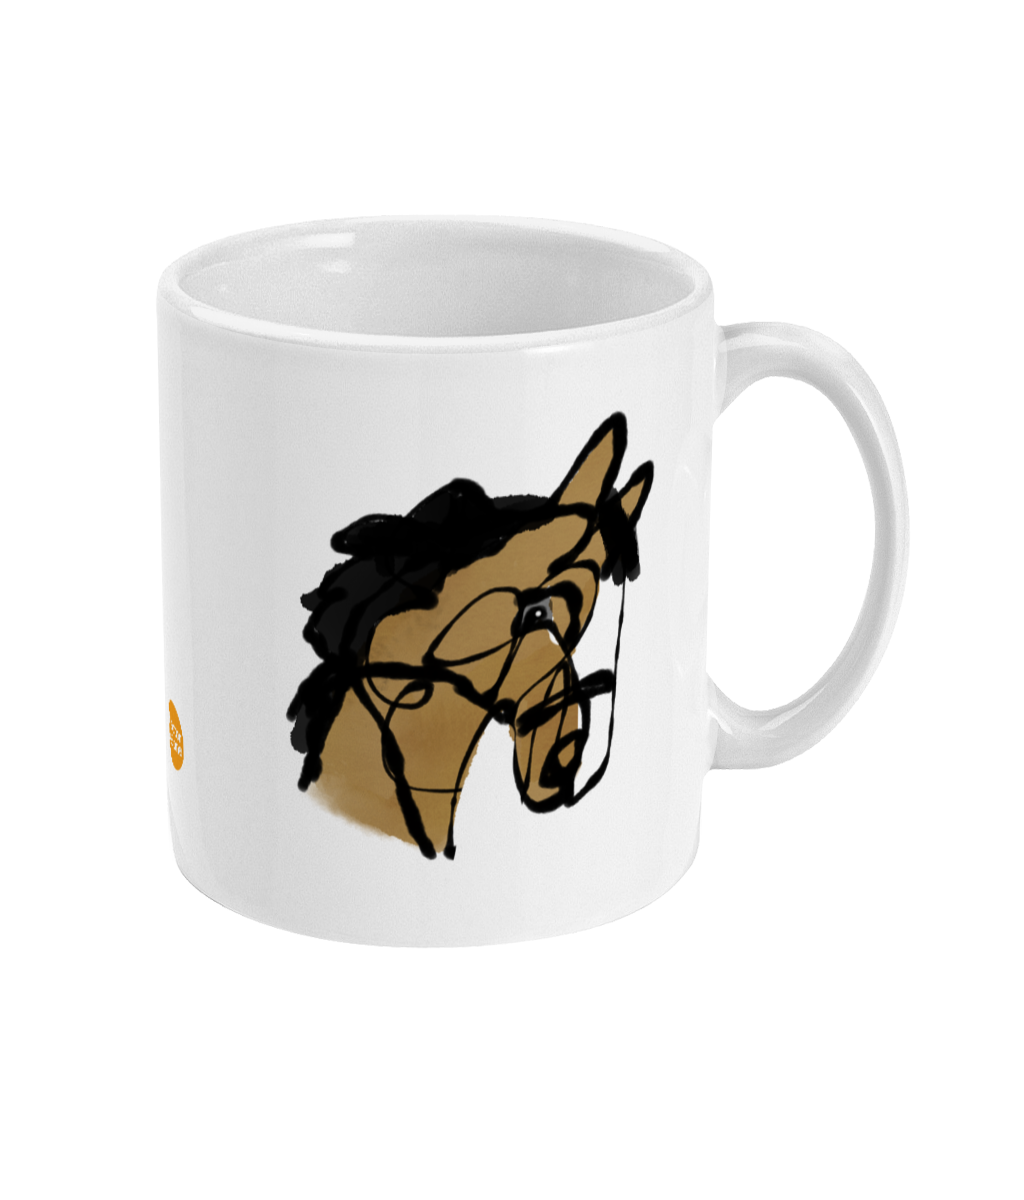 I Love my Horse coffee mug illustrated by Hector and Bone Right View